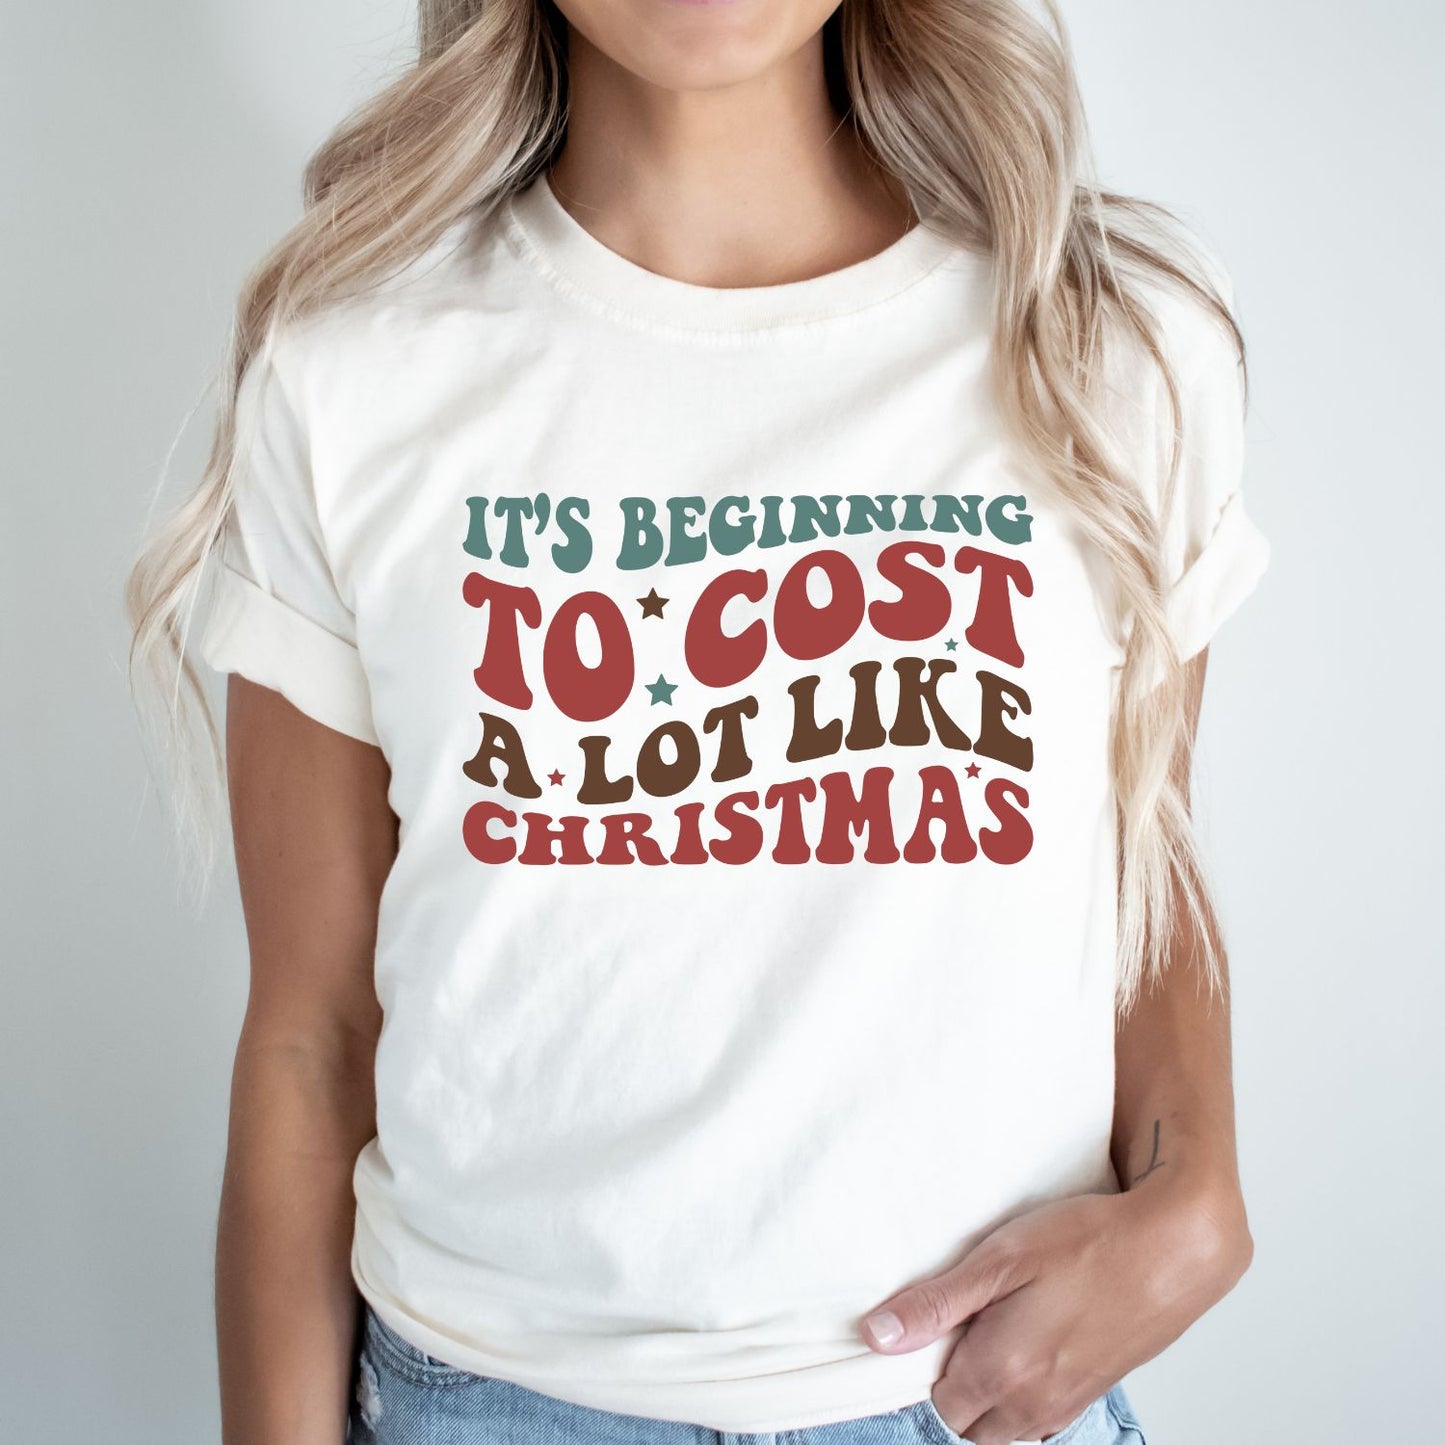 It's Beginning to Cost a lot like Christmas - Christmas Retro Tee